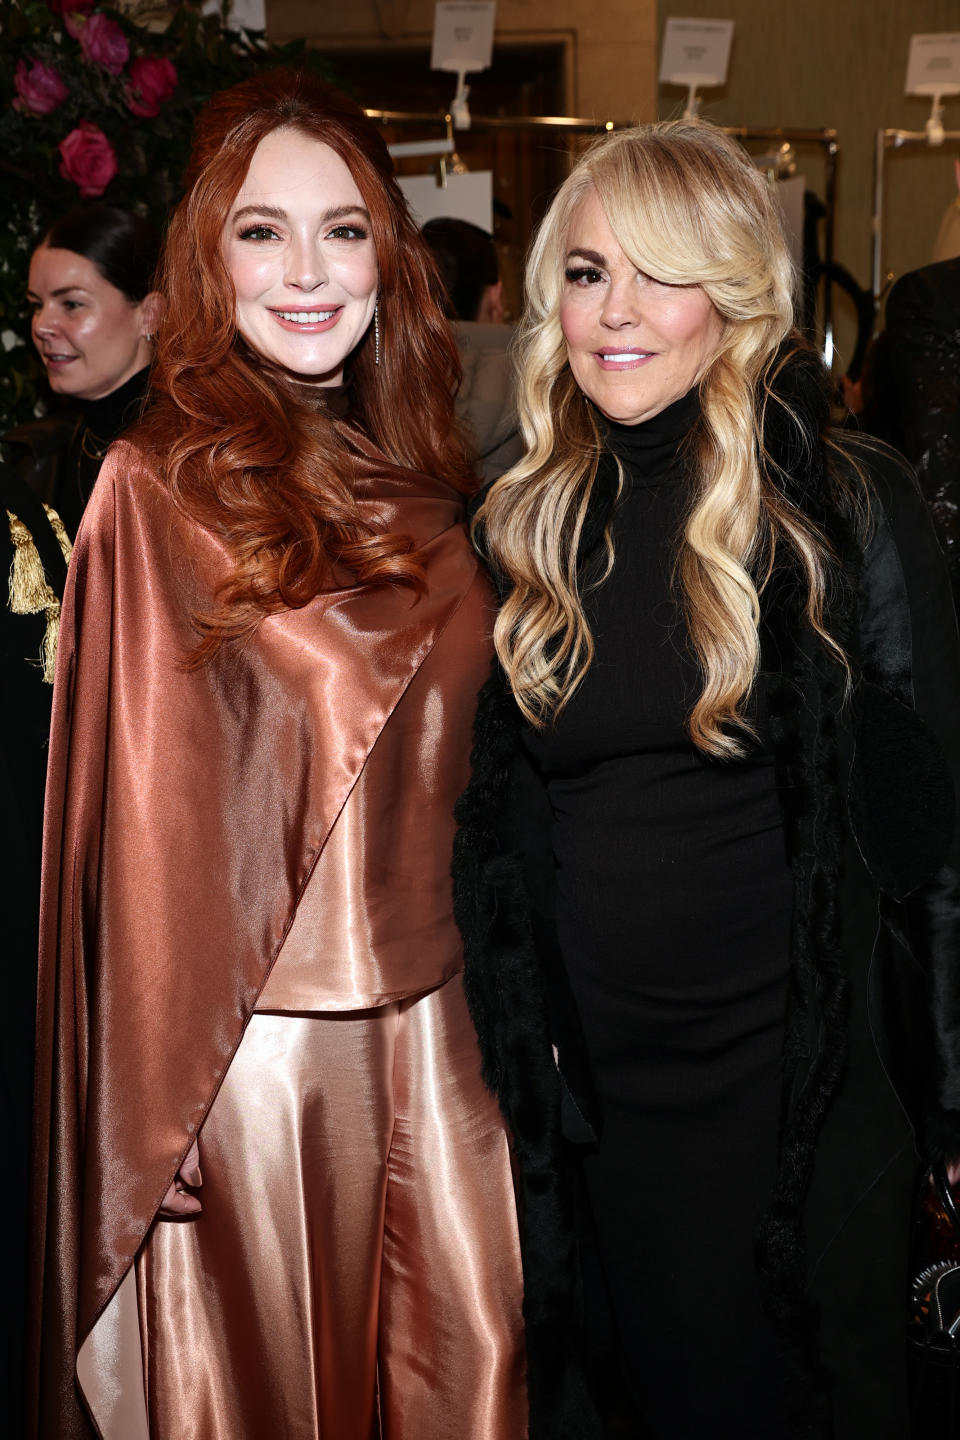 NEW YORK, NEW YORK - FEBRUARY 09: (L-R) Lindsay Lohan and Dina Lohan pose backstage at the Christian Siriano Fall/Winter 2023 NYFW Show at Gotham Hall on February 09, 2023 in New York City. (Photo by Jamie McCarthy/Getty Images for Christian Siriano)